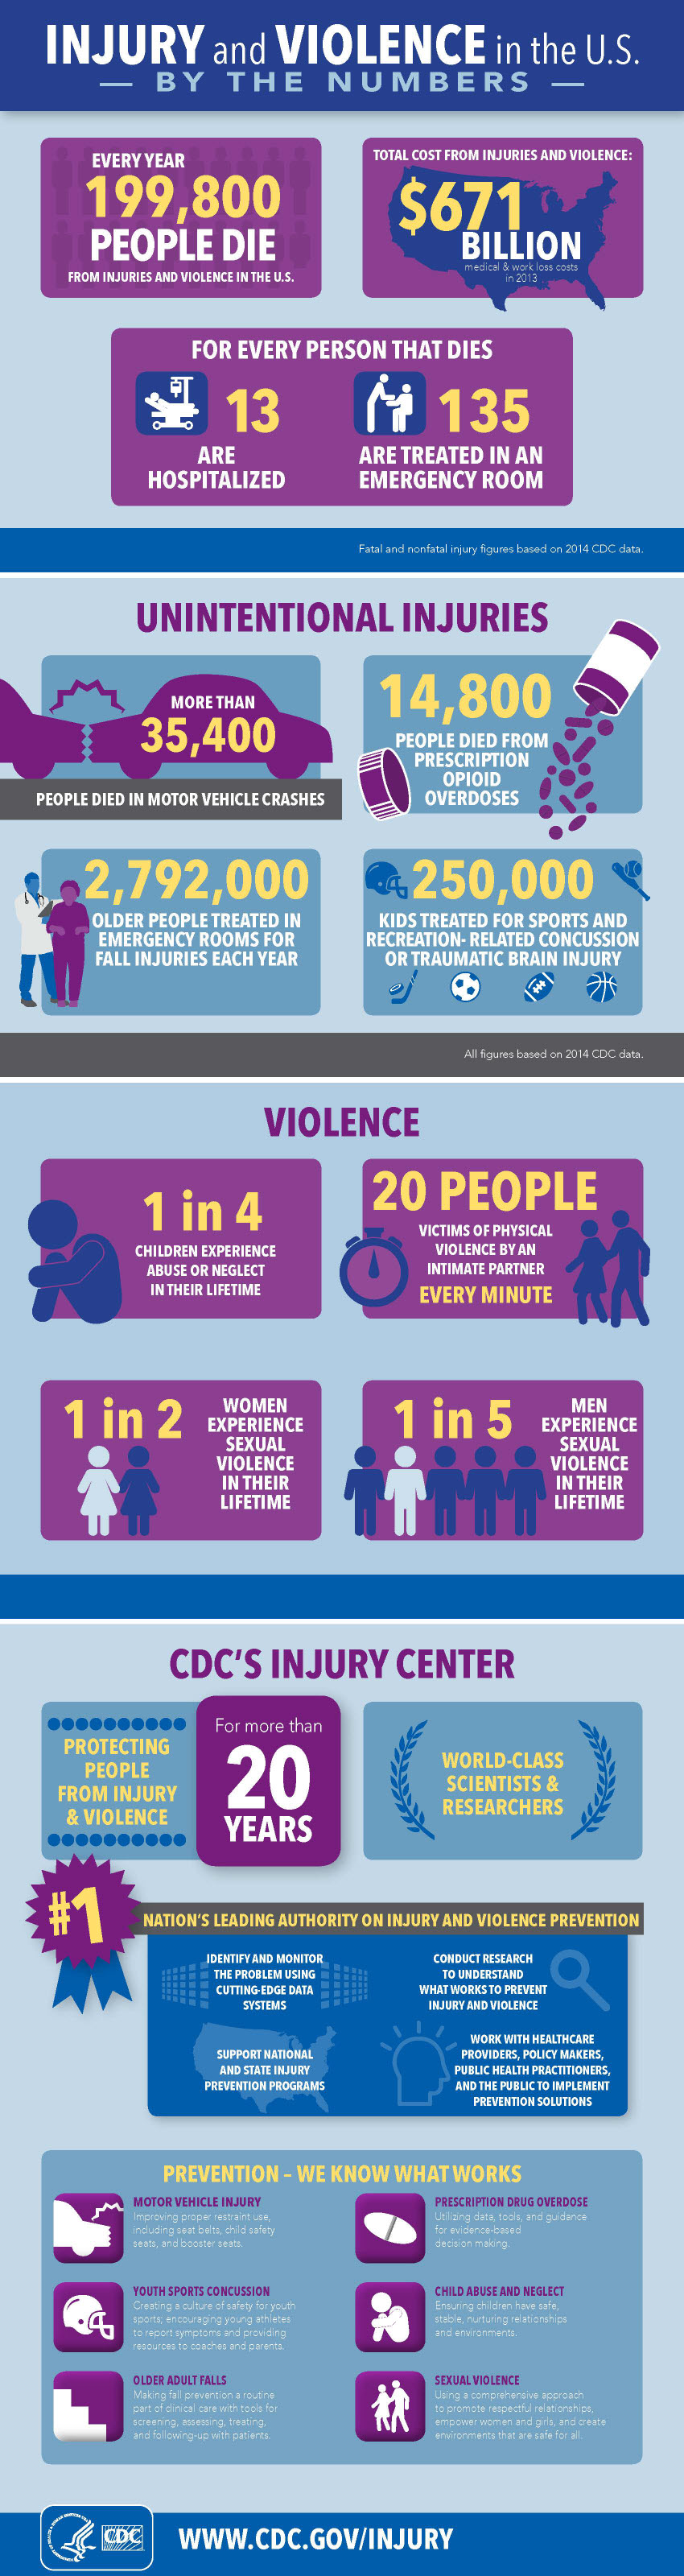 Injury and violence in the United States by the numbers